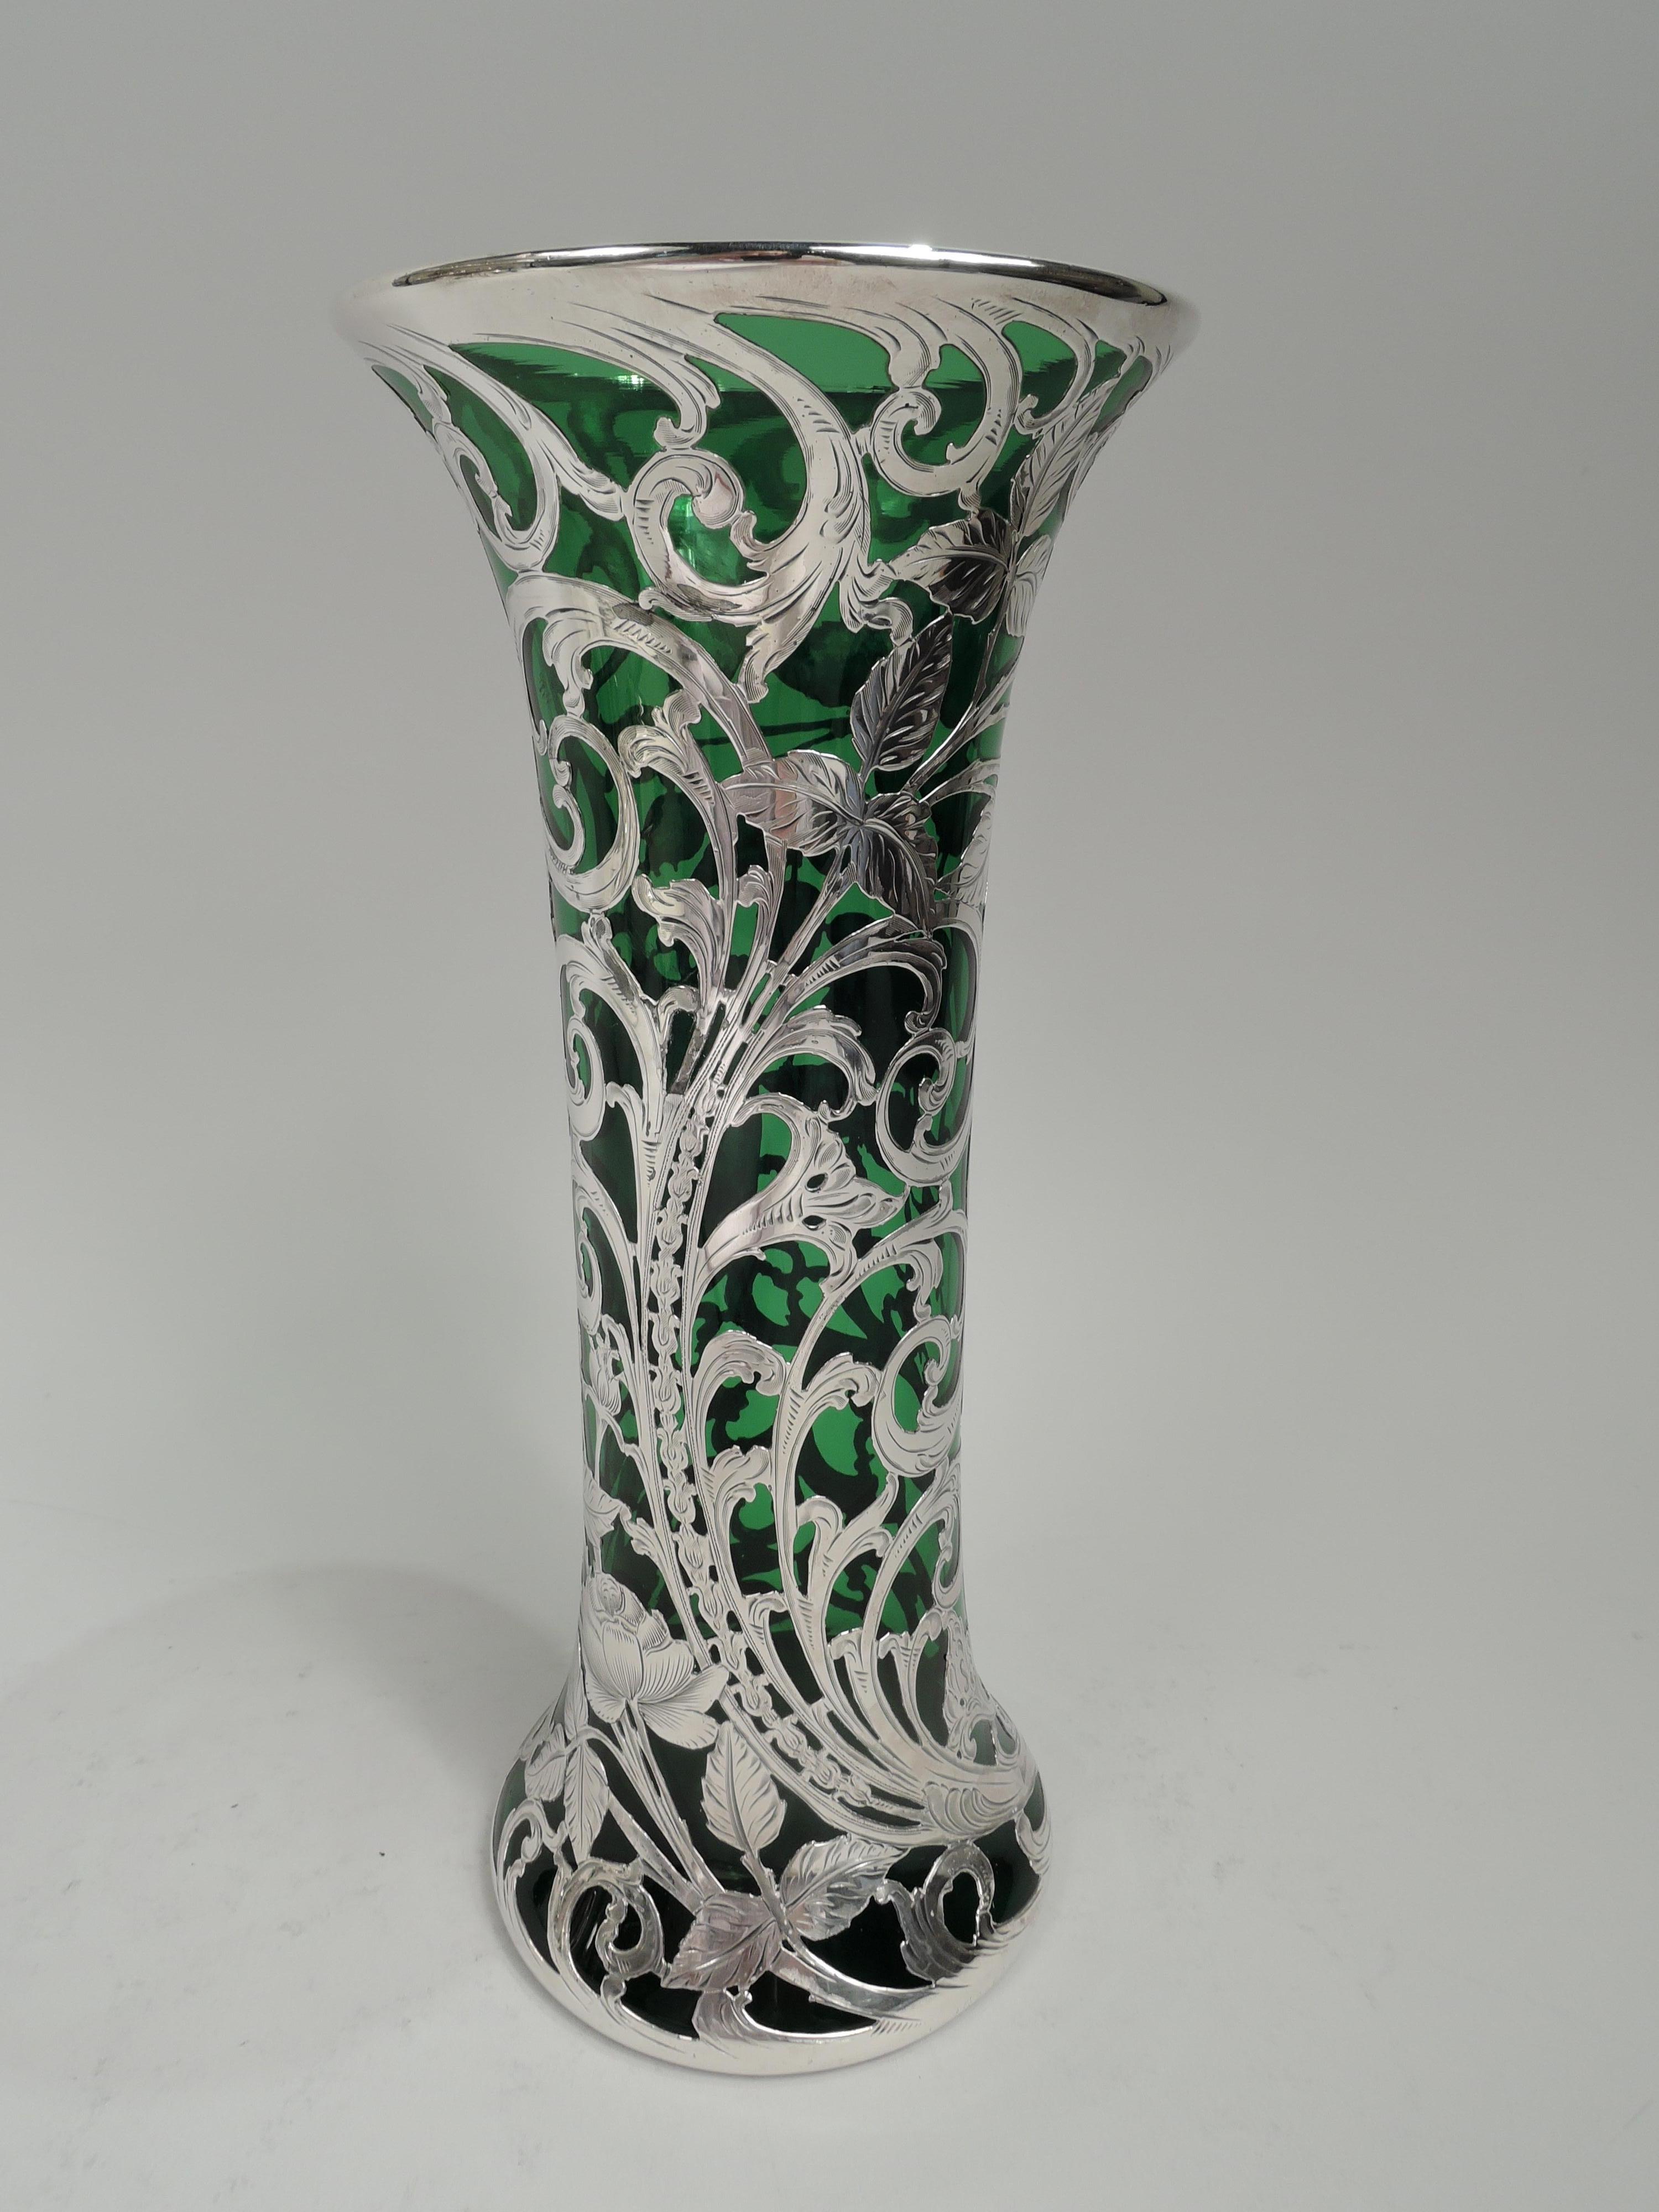 Turn-of-the-century American Art Nouveau glass vase with engraved silver overlay. Cylindrical with flared mouth and spread bae. Dense and scrolling overlay in form of leafing and flowering tendrils, and scrolled cartouche (vacant). Glass is green.